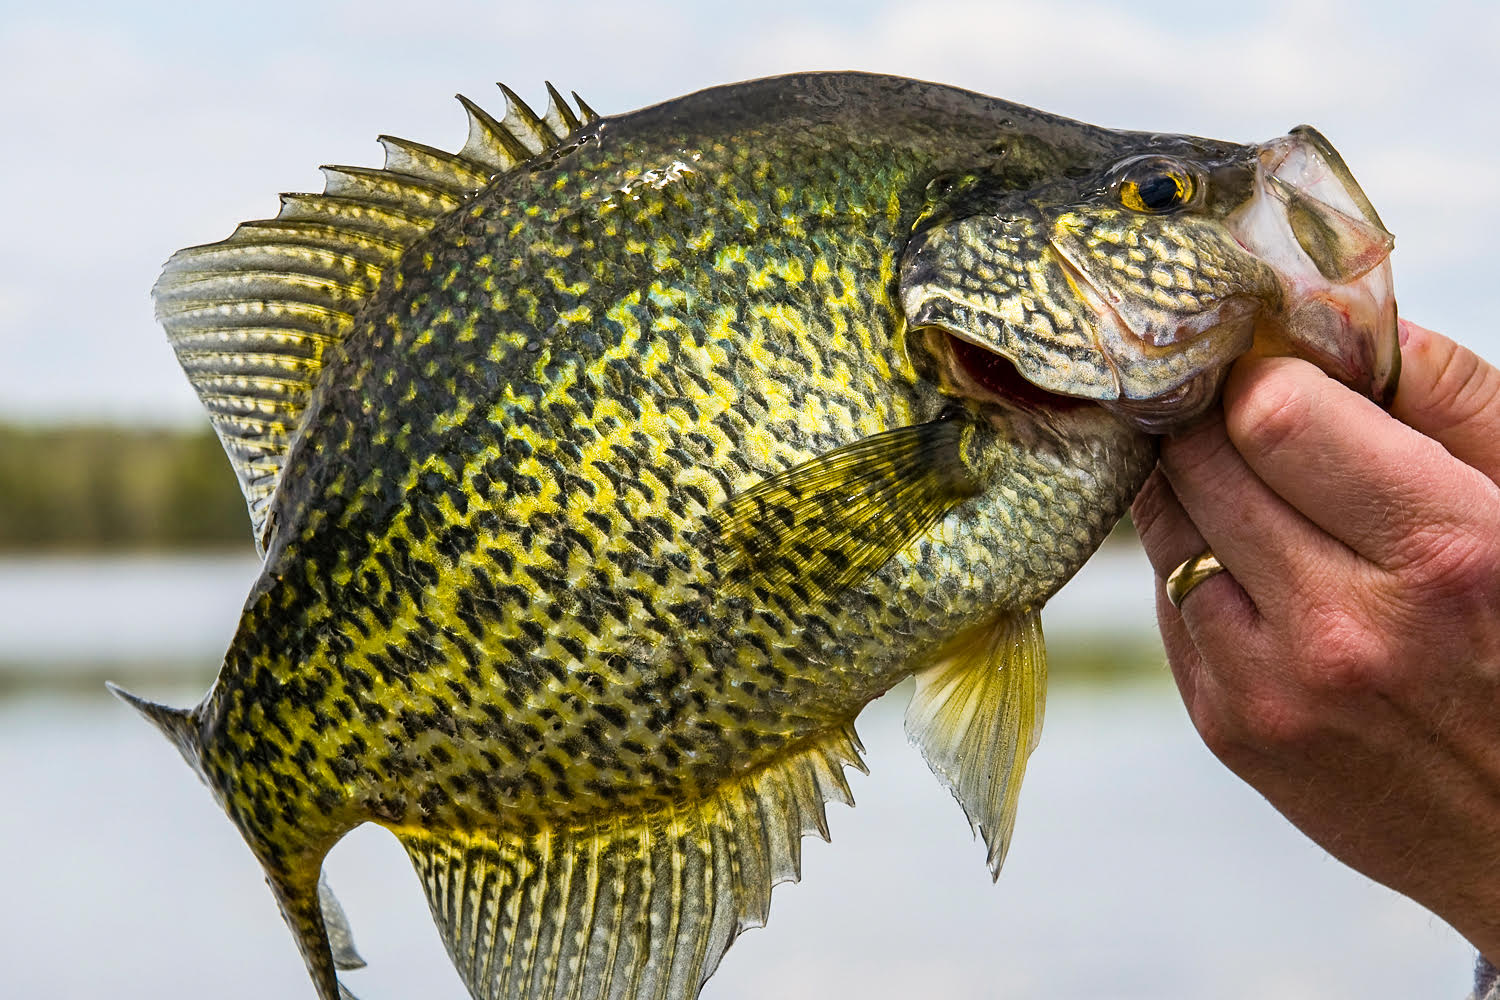 Summertime crappies  Fishing The Midwest